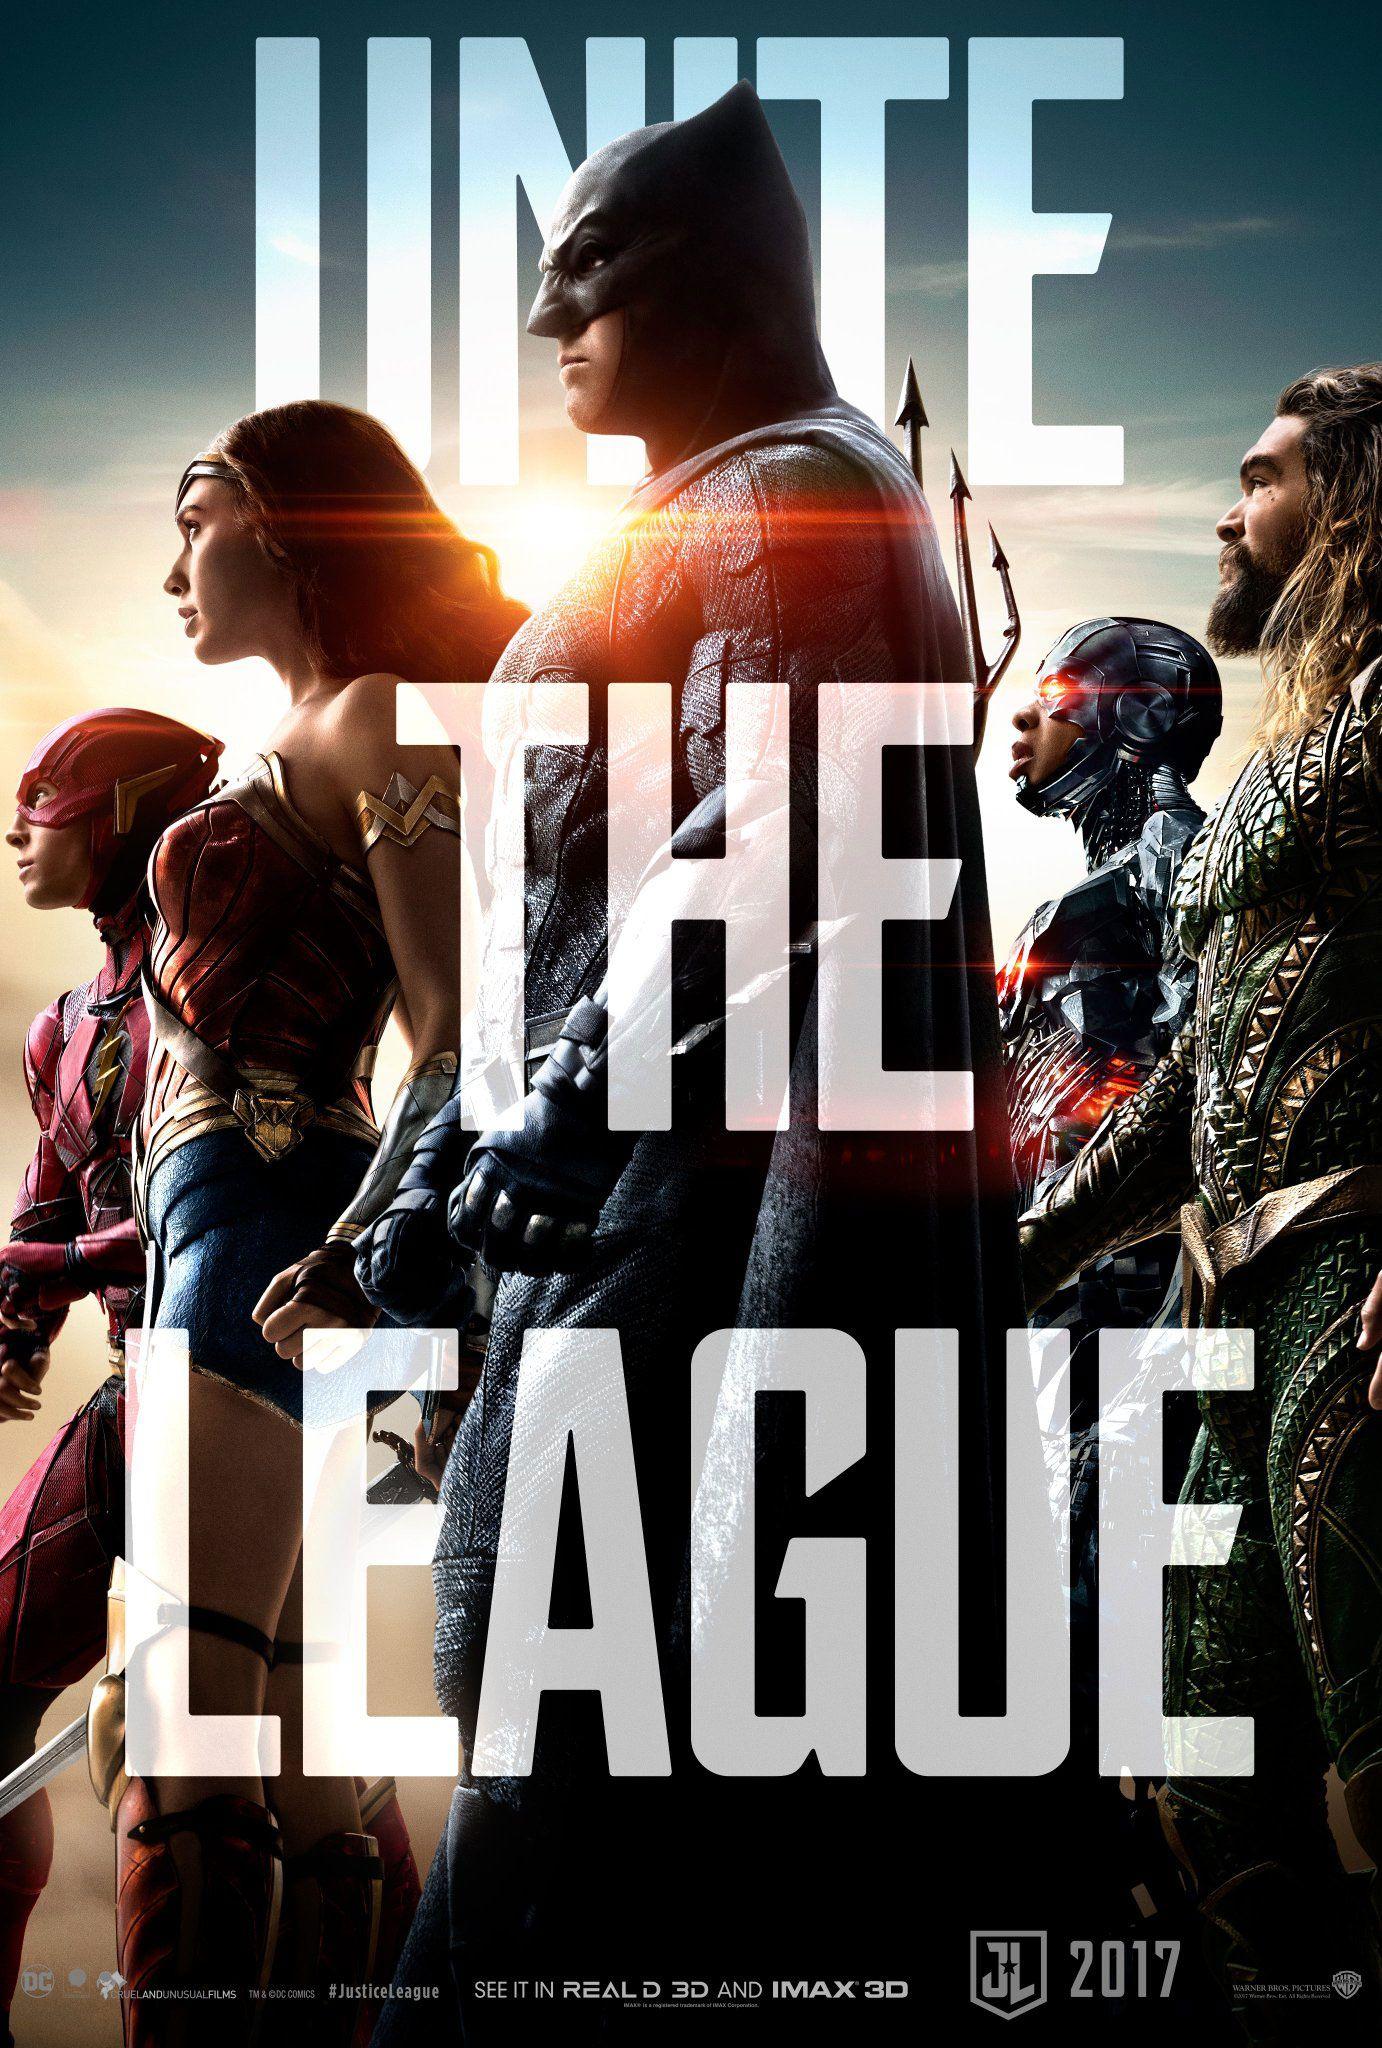 Warner Bros Feature Presentation Logo - The League Join Forces In A New Justice League Poster Feature